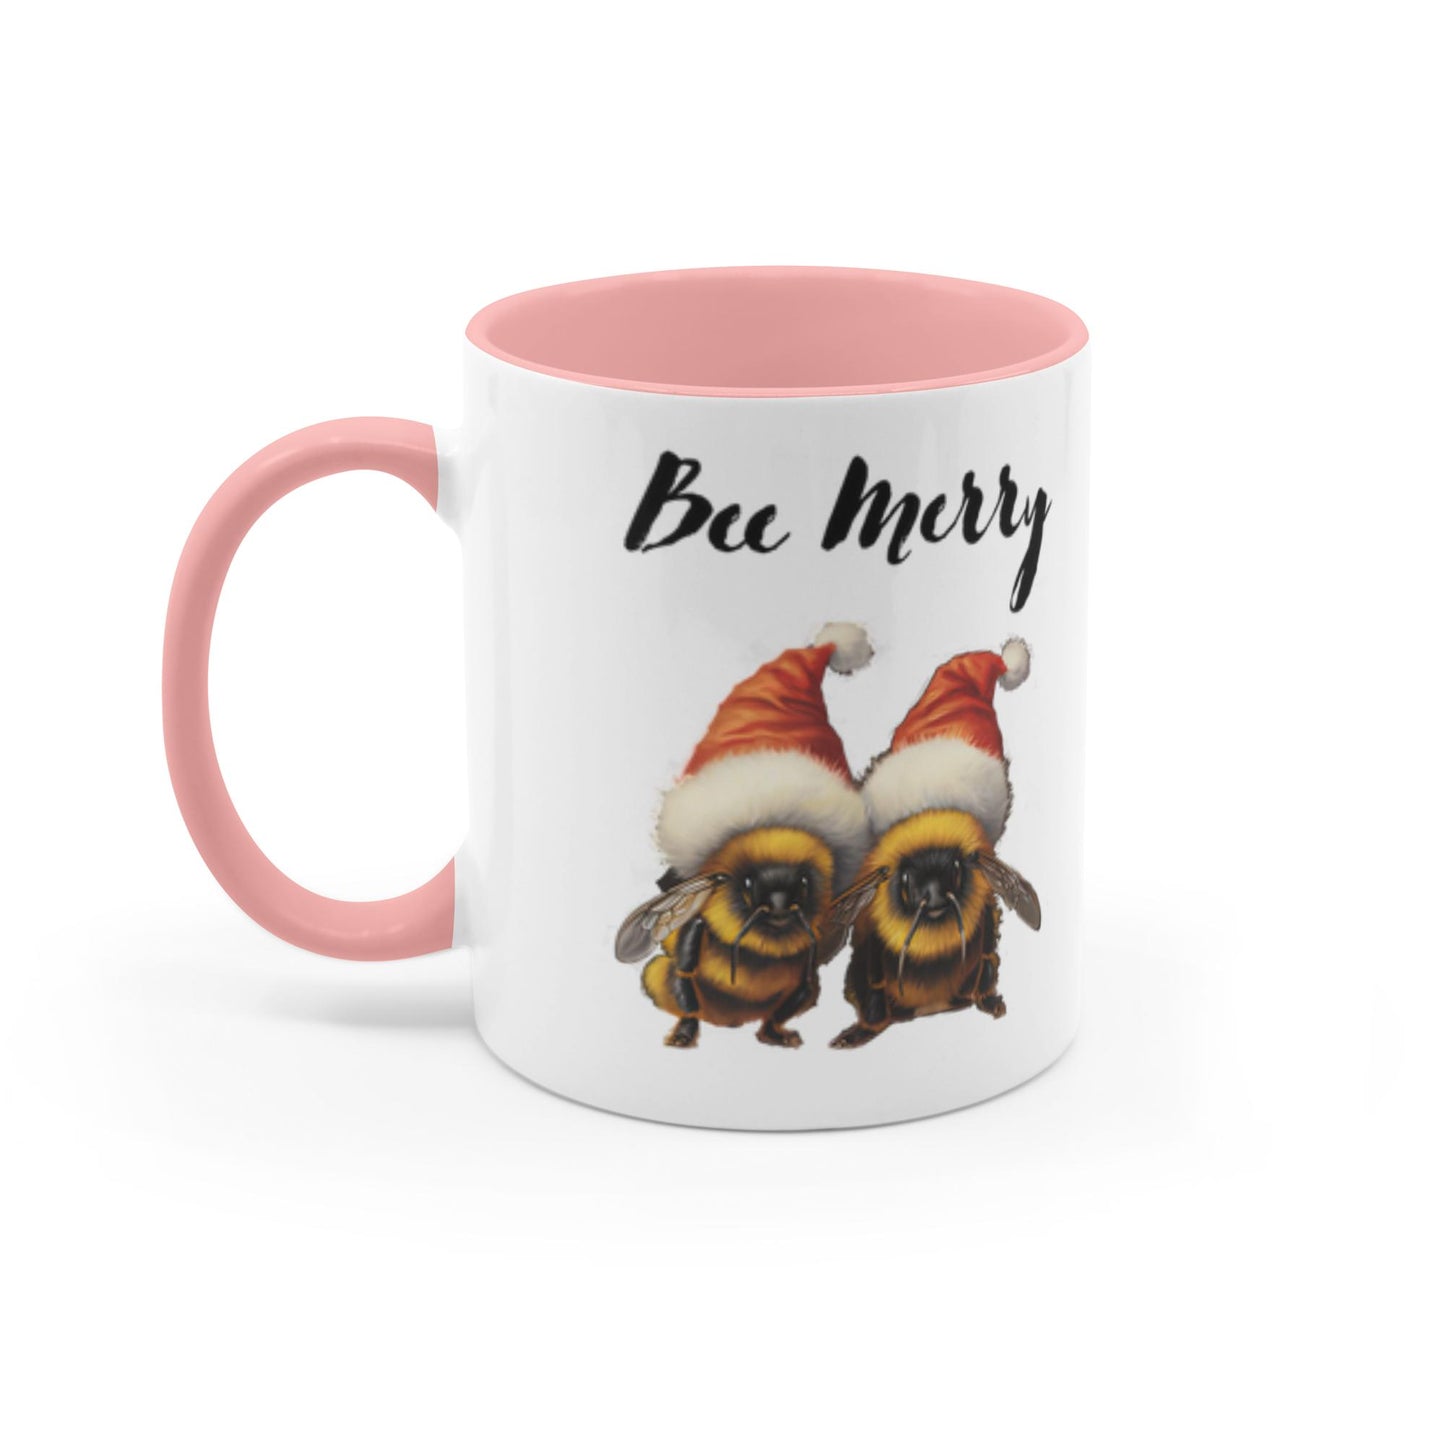 Bee Merry Accent Mug 11 oz White with Pink Accents Coffee & Tea Cups gifts holiday store